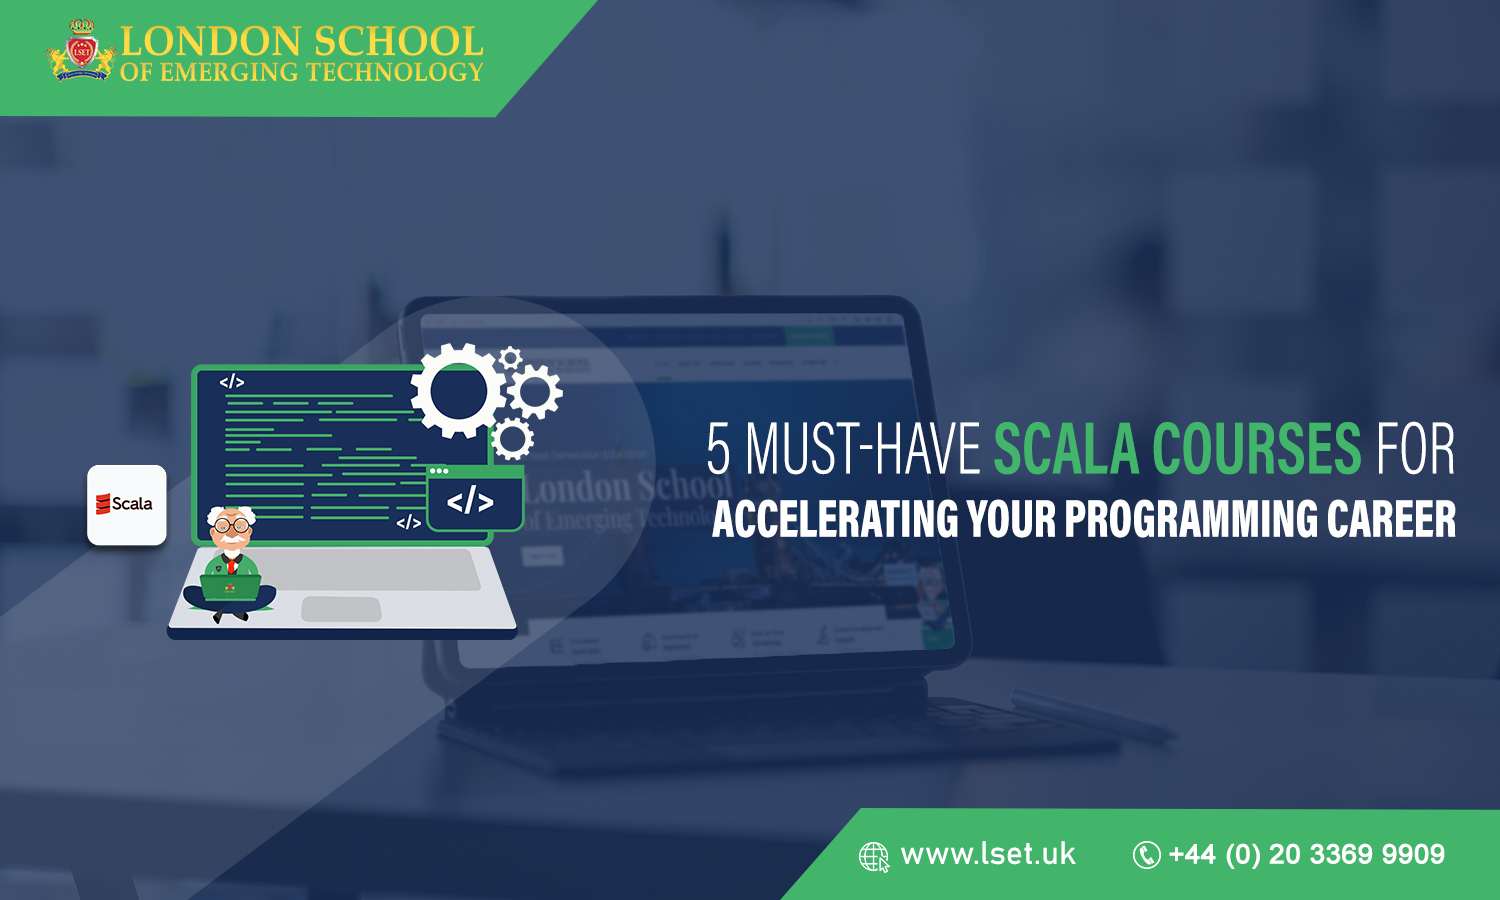 5 Must-Have Scala Courses for Accelerating Your Programming Career